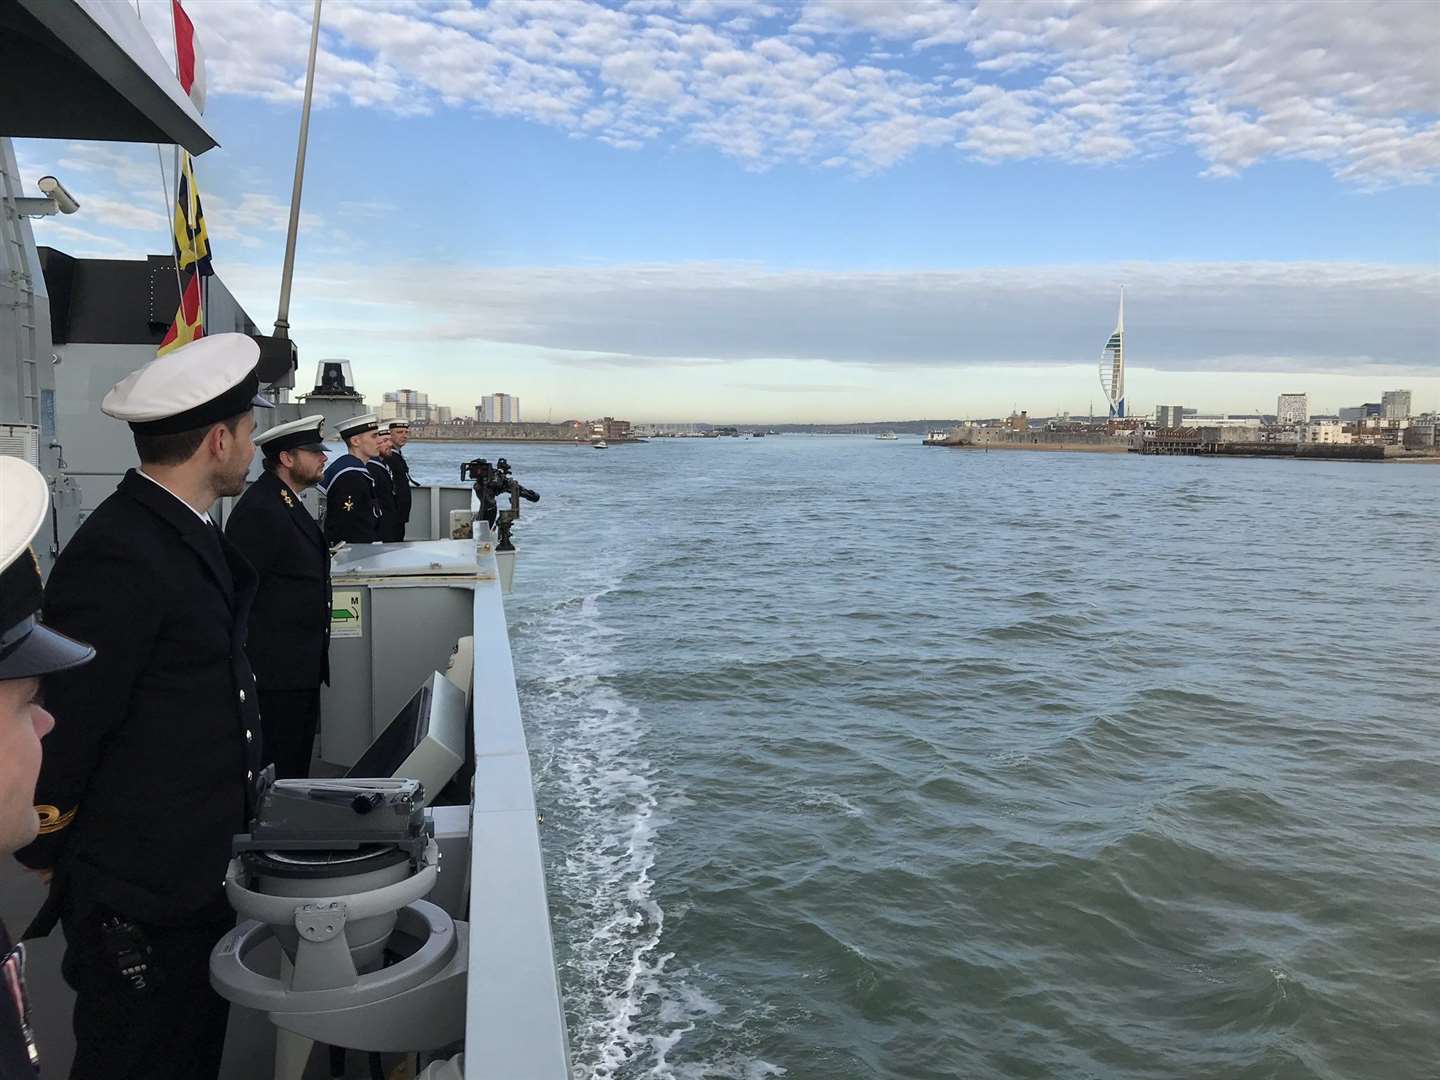 HMS Medway and her crew set sail from Portsmouth on their first deployment. They will be in the Caribbean protecting Commonwealth and British protectorates in the region from narcotic smuggling and providing humanitarian aid. Picture: HMS Medway/Twitter